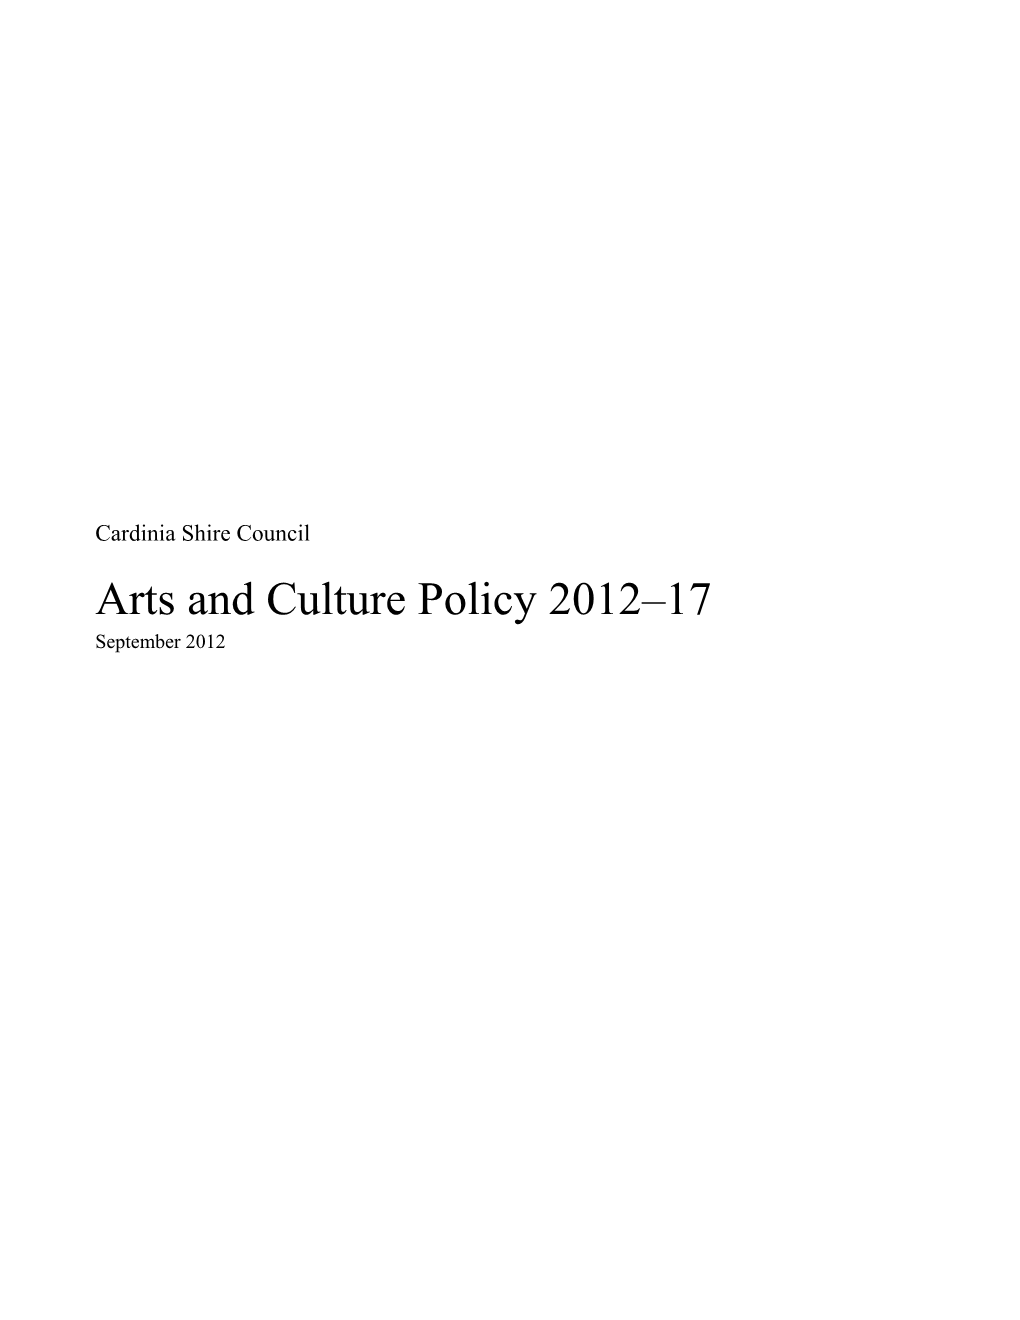 Arts and Culture Policy 2012 17